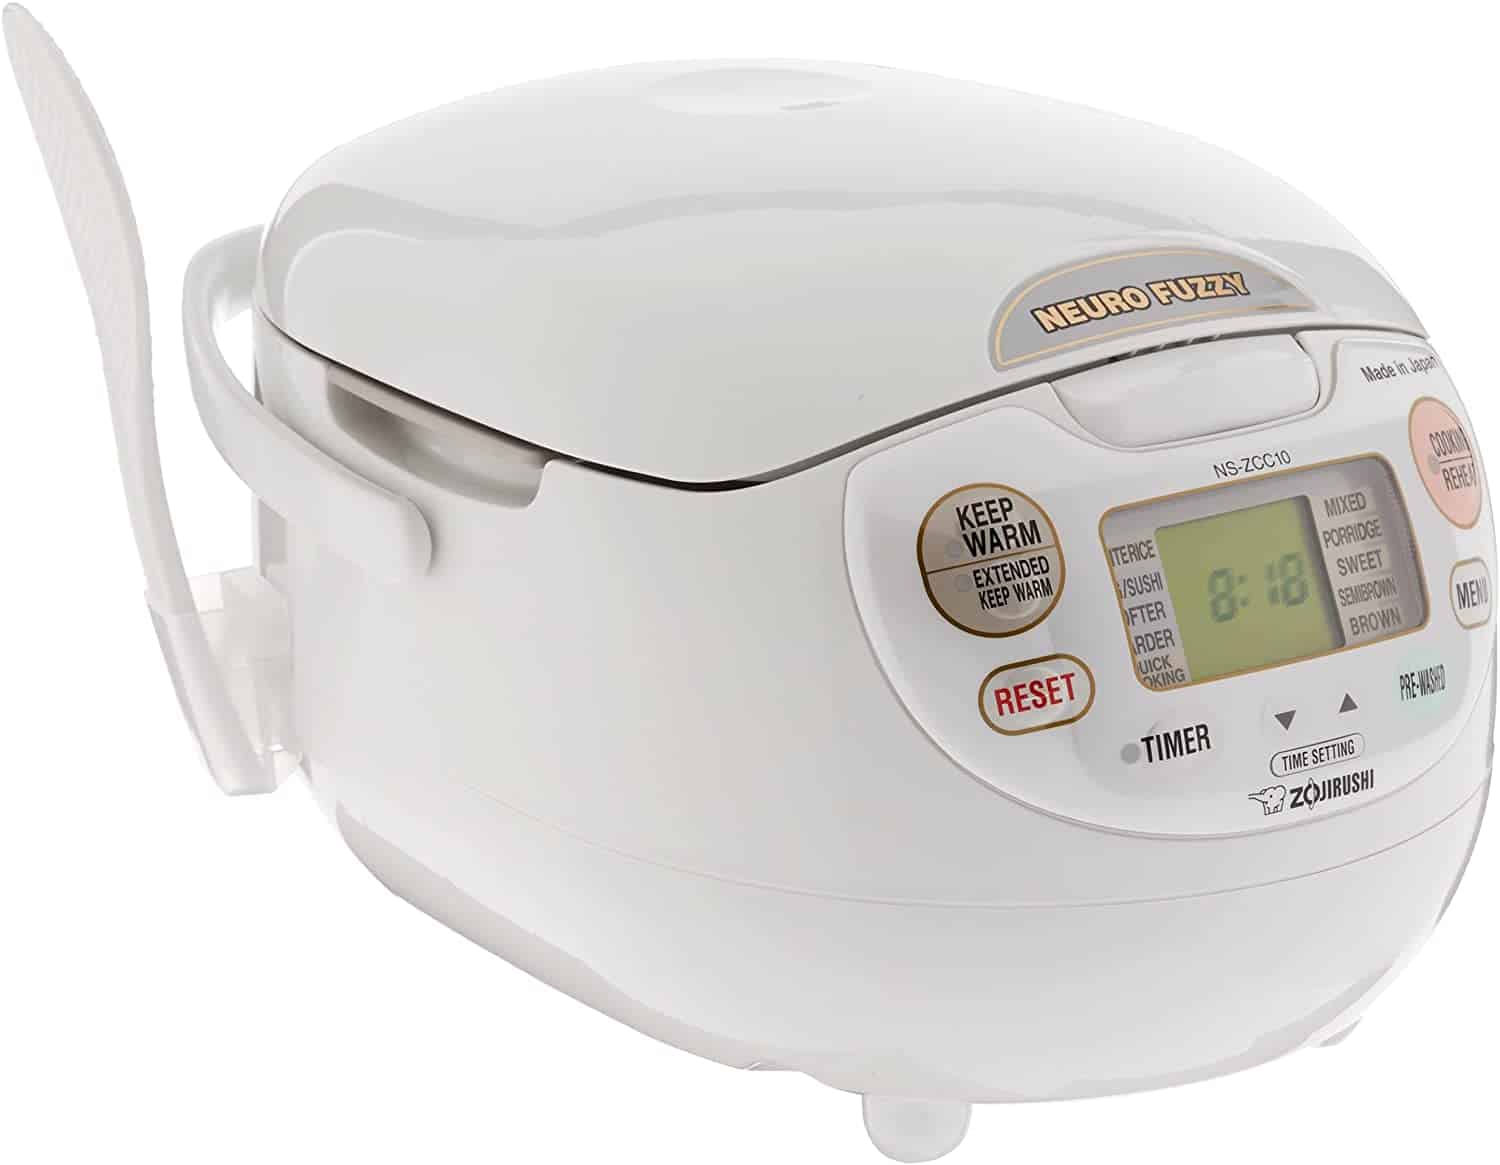 Overall best rice cooker: Zojirushi Neuro Fuzzy Rice Cooker and Warmer